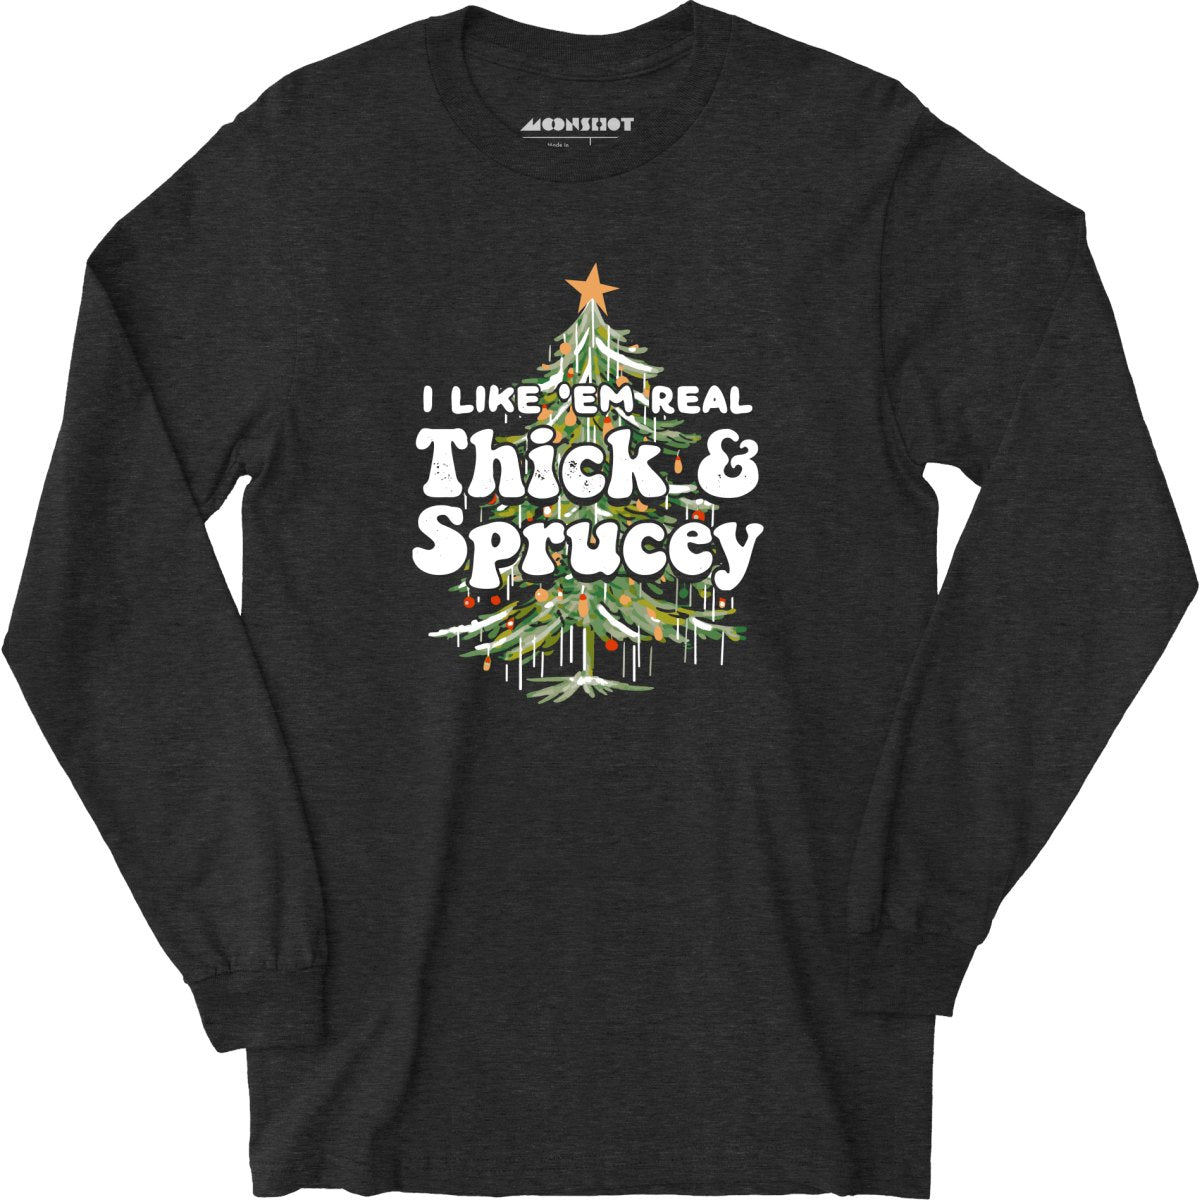 I Like em Real Thick and Sprucey - Long Sleeve T-Shirt